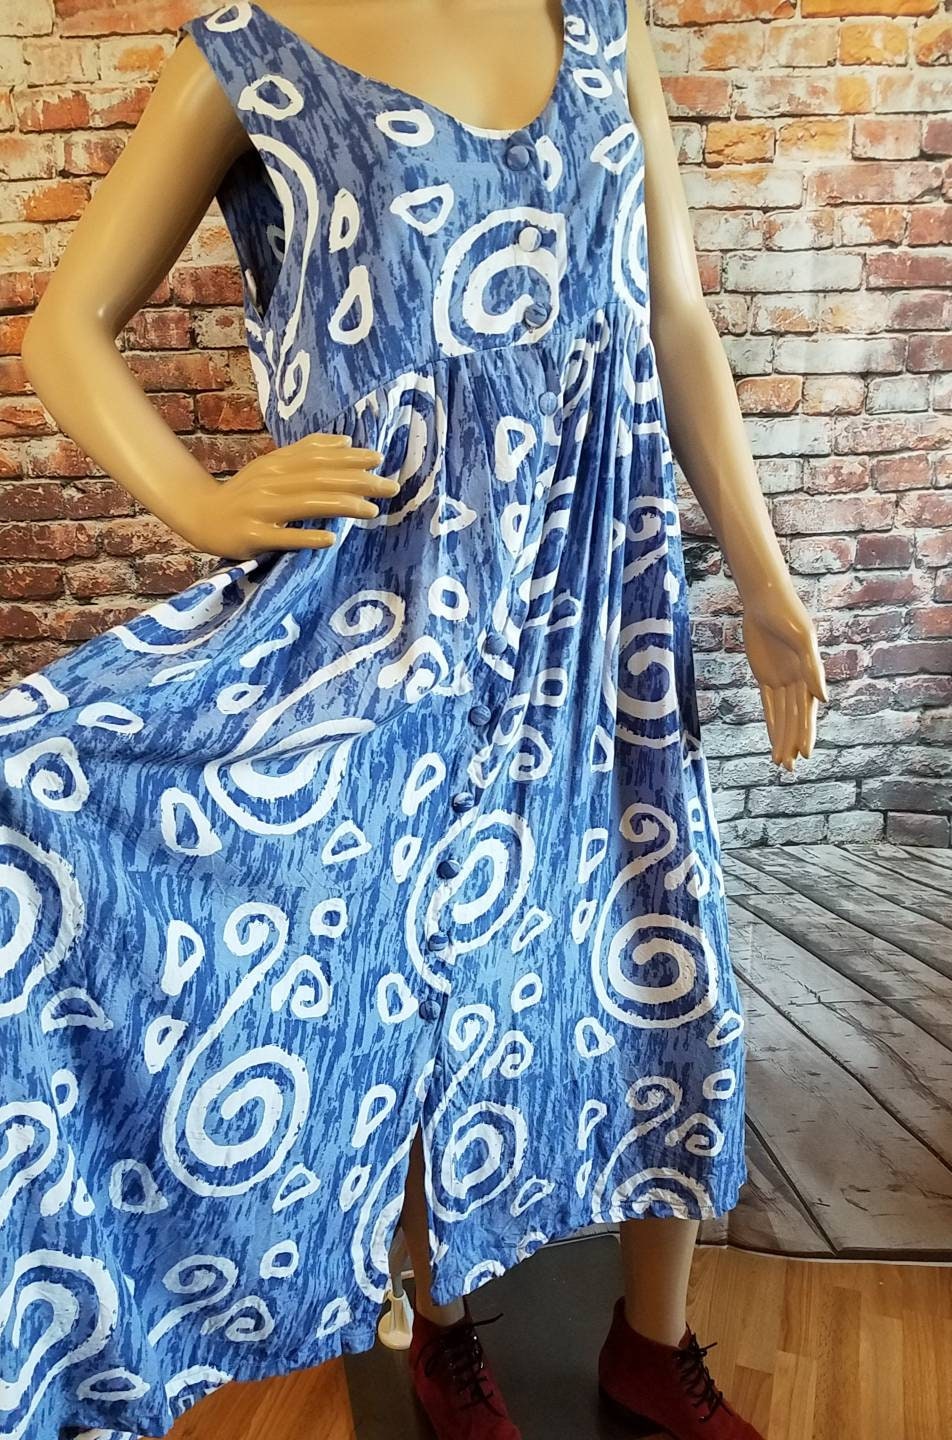 80s Flowy Swirls Dress W/ Buttons Periwinkle Blue and White | Etsy